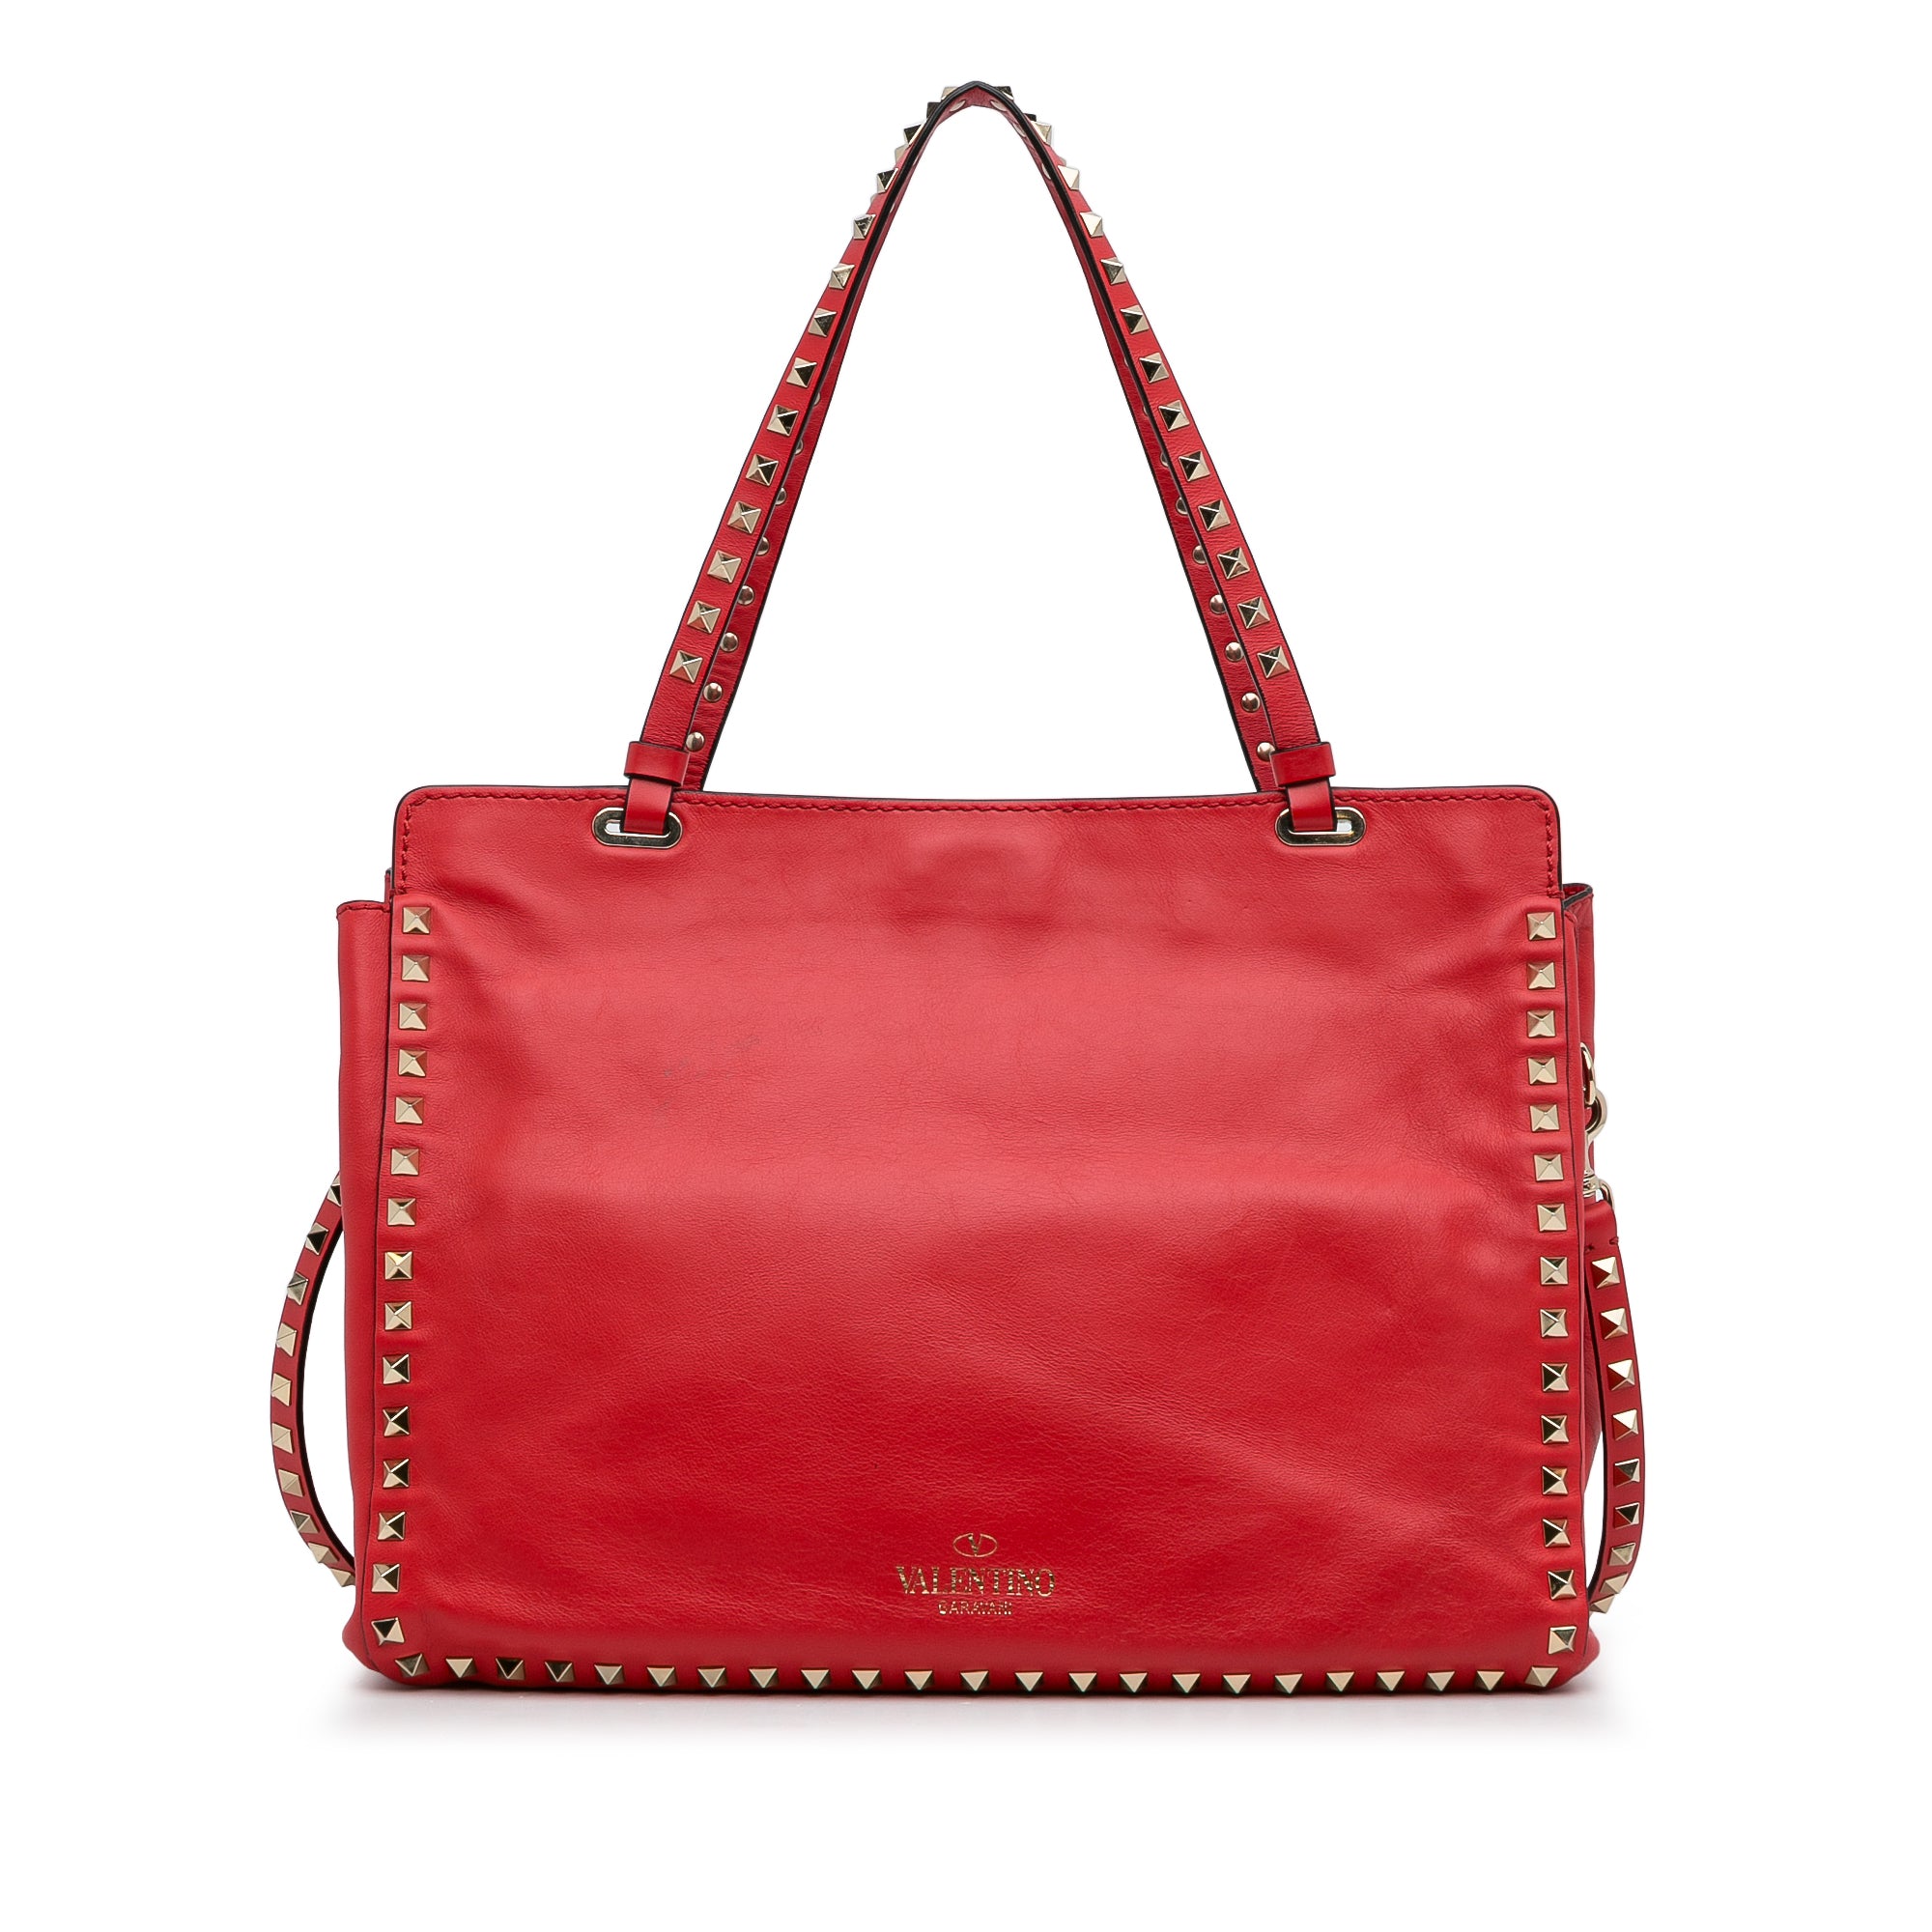 Red Valentino leather bag